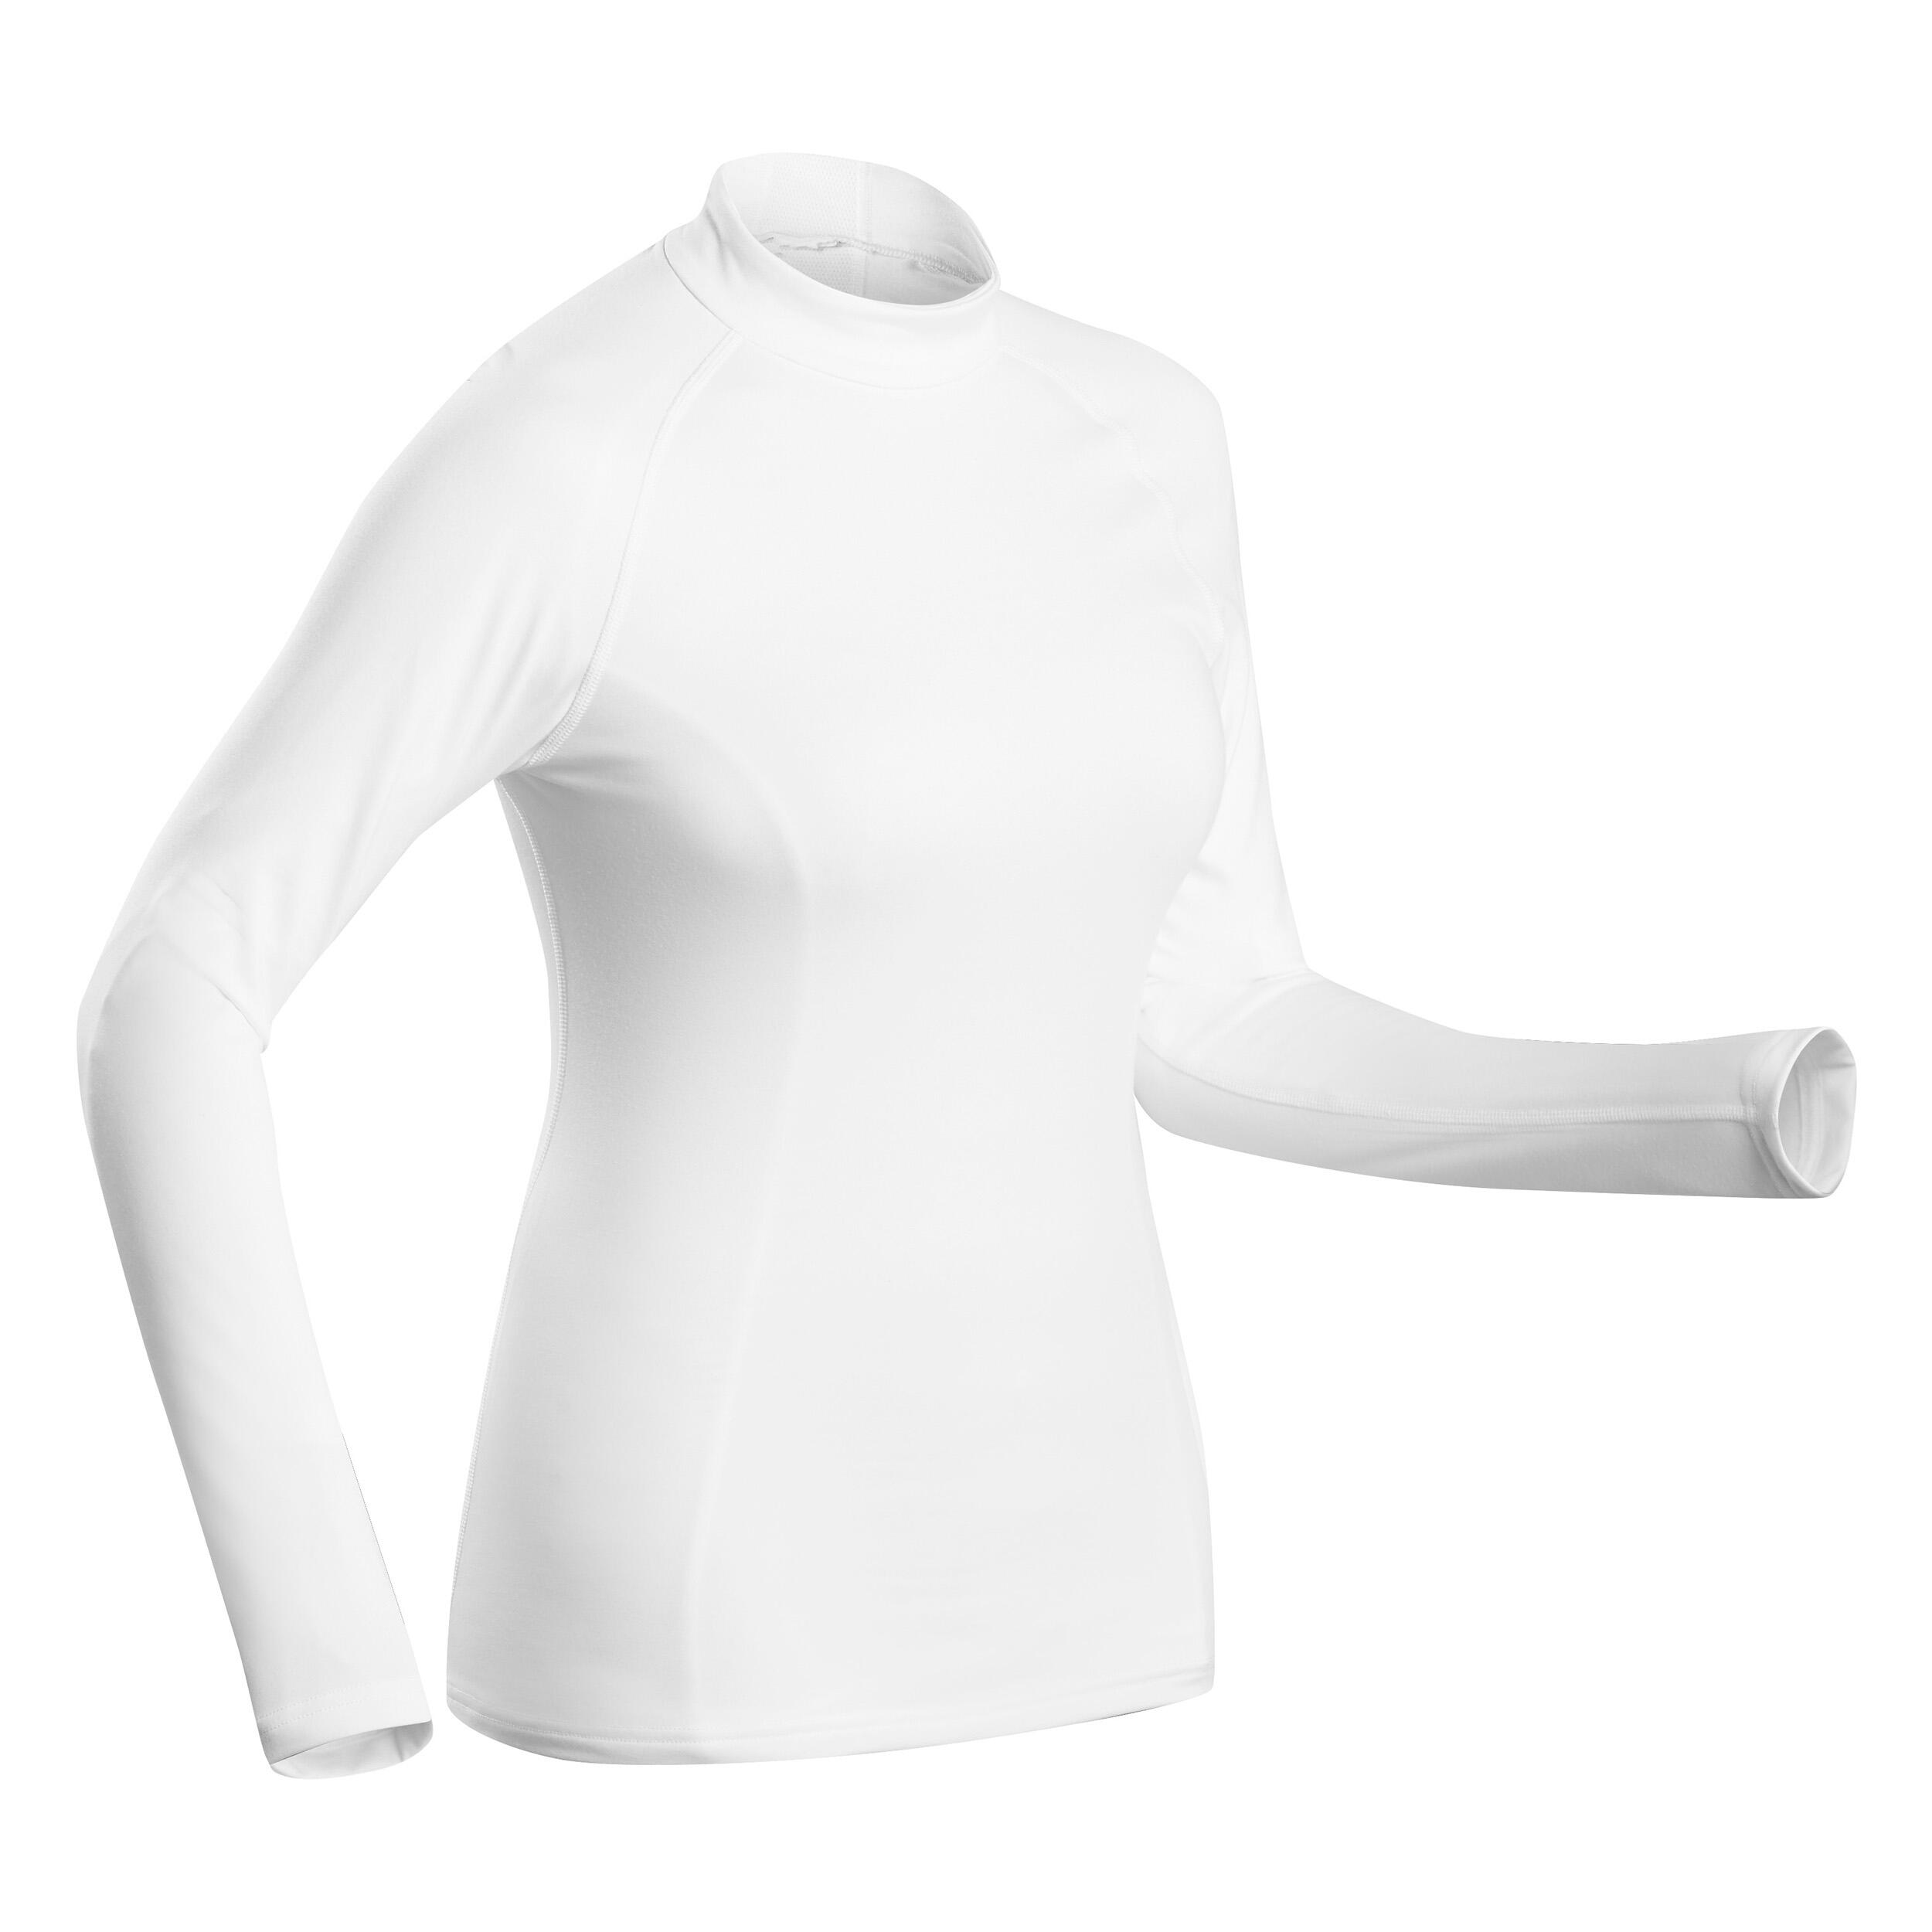 Snowdrop Ladies Thermal Short Sleeve Top White - Small (8-10) - SDS/SS